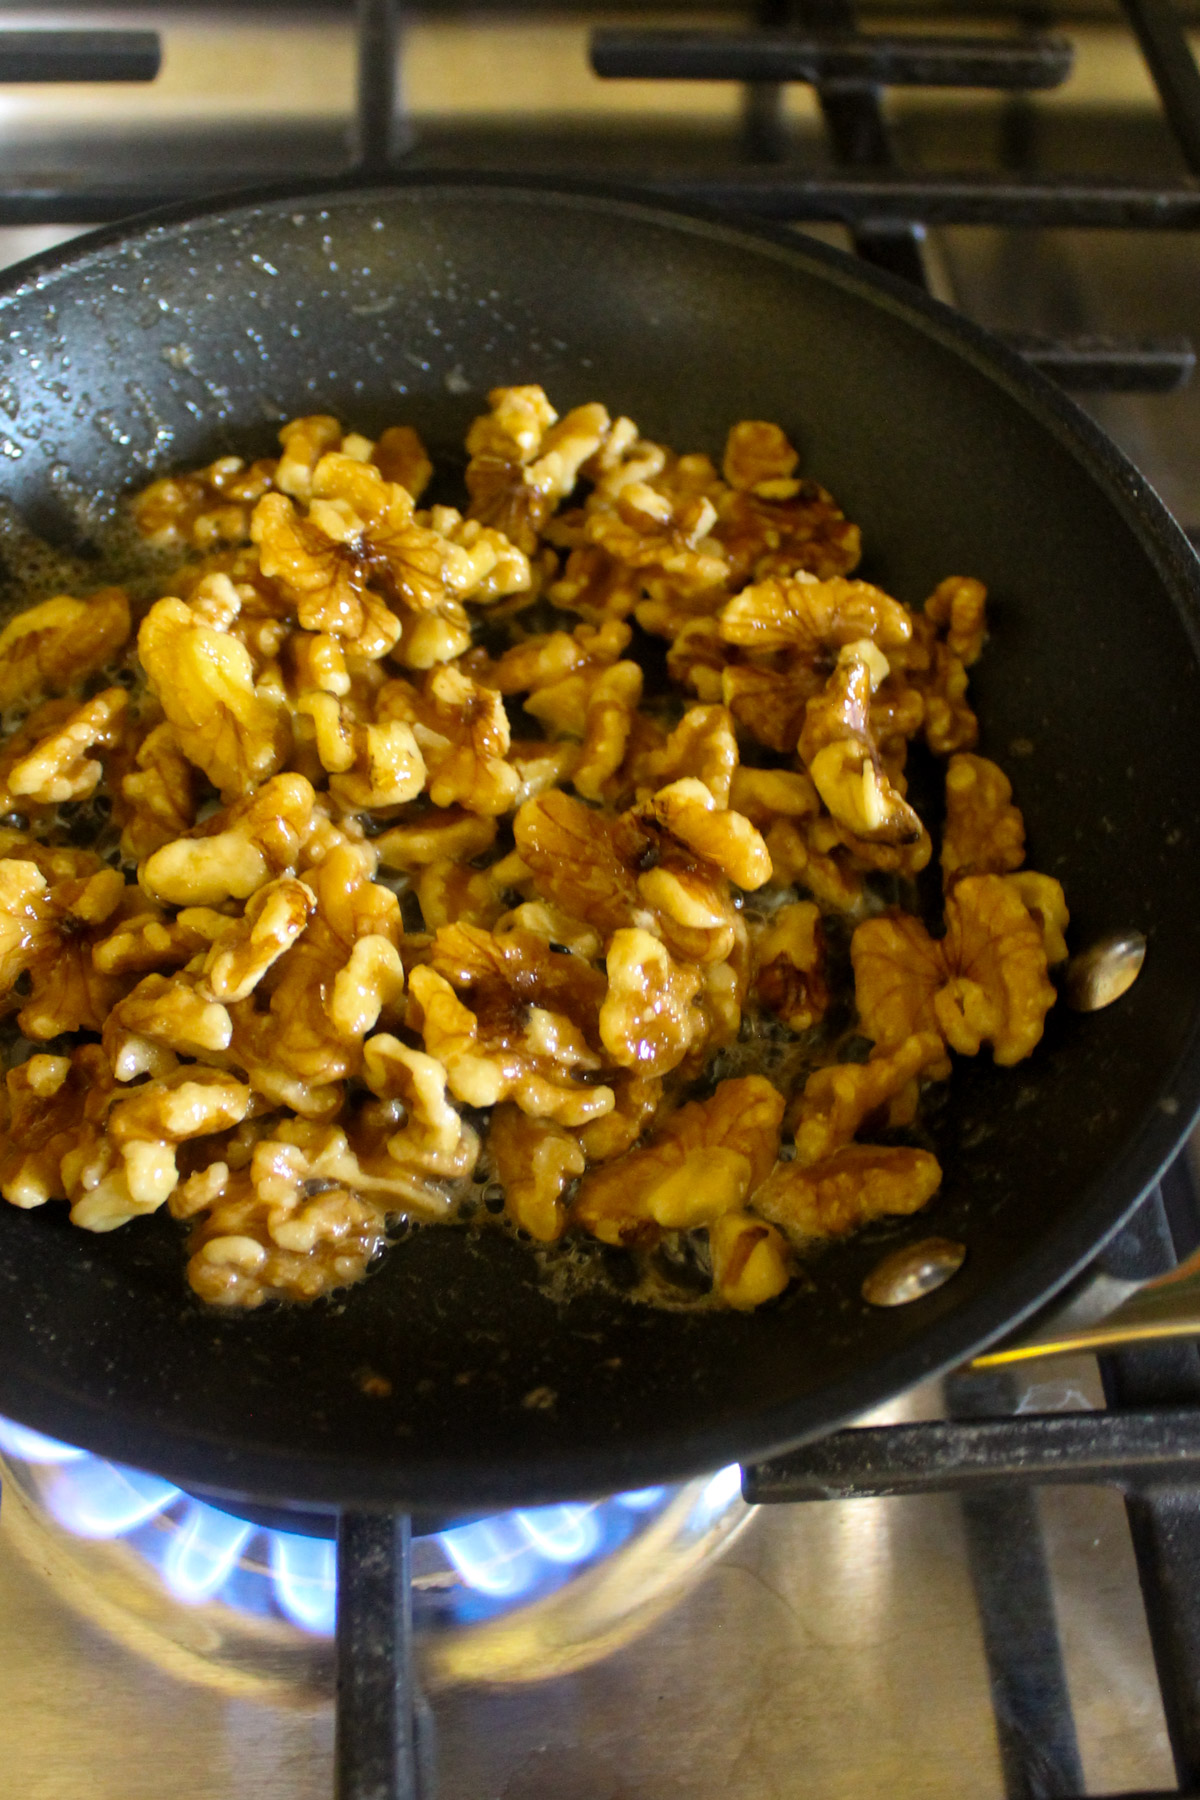 Toasting candied walnuts in a skillet with butter and brown sugar.